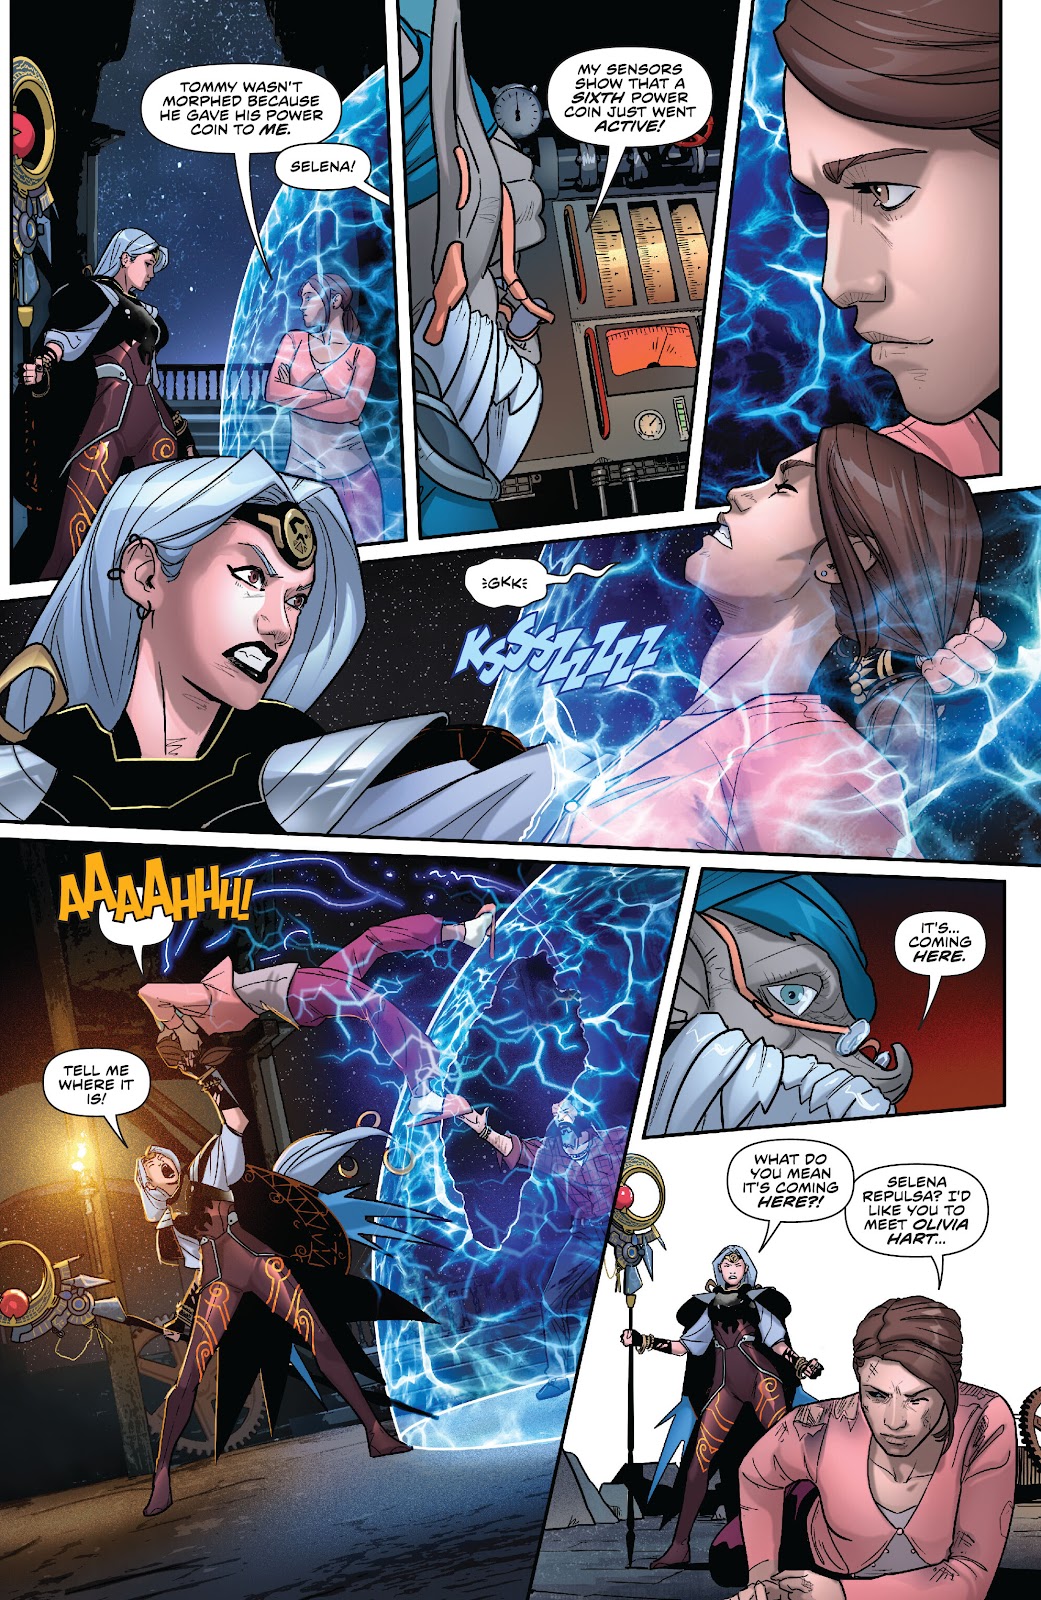 Mighty Morphin Power Rangers: The Return issue 3 - Page 22